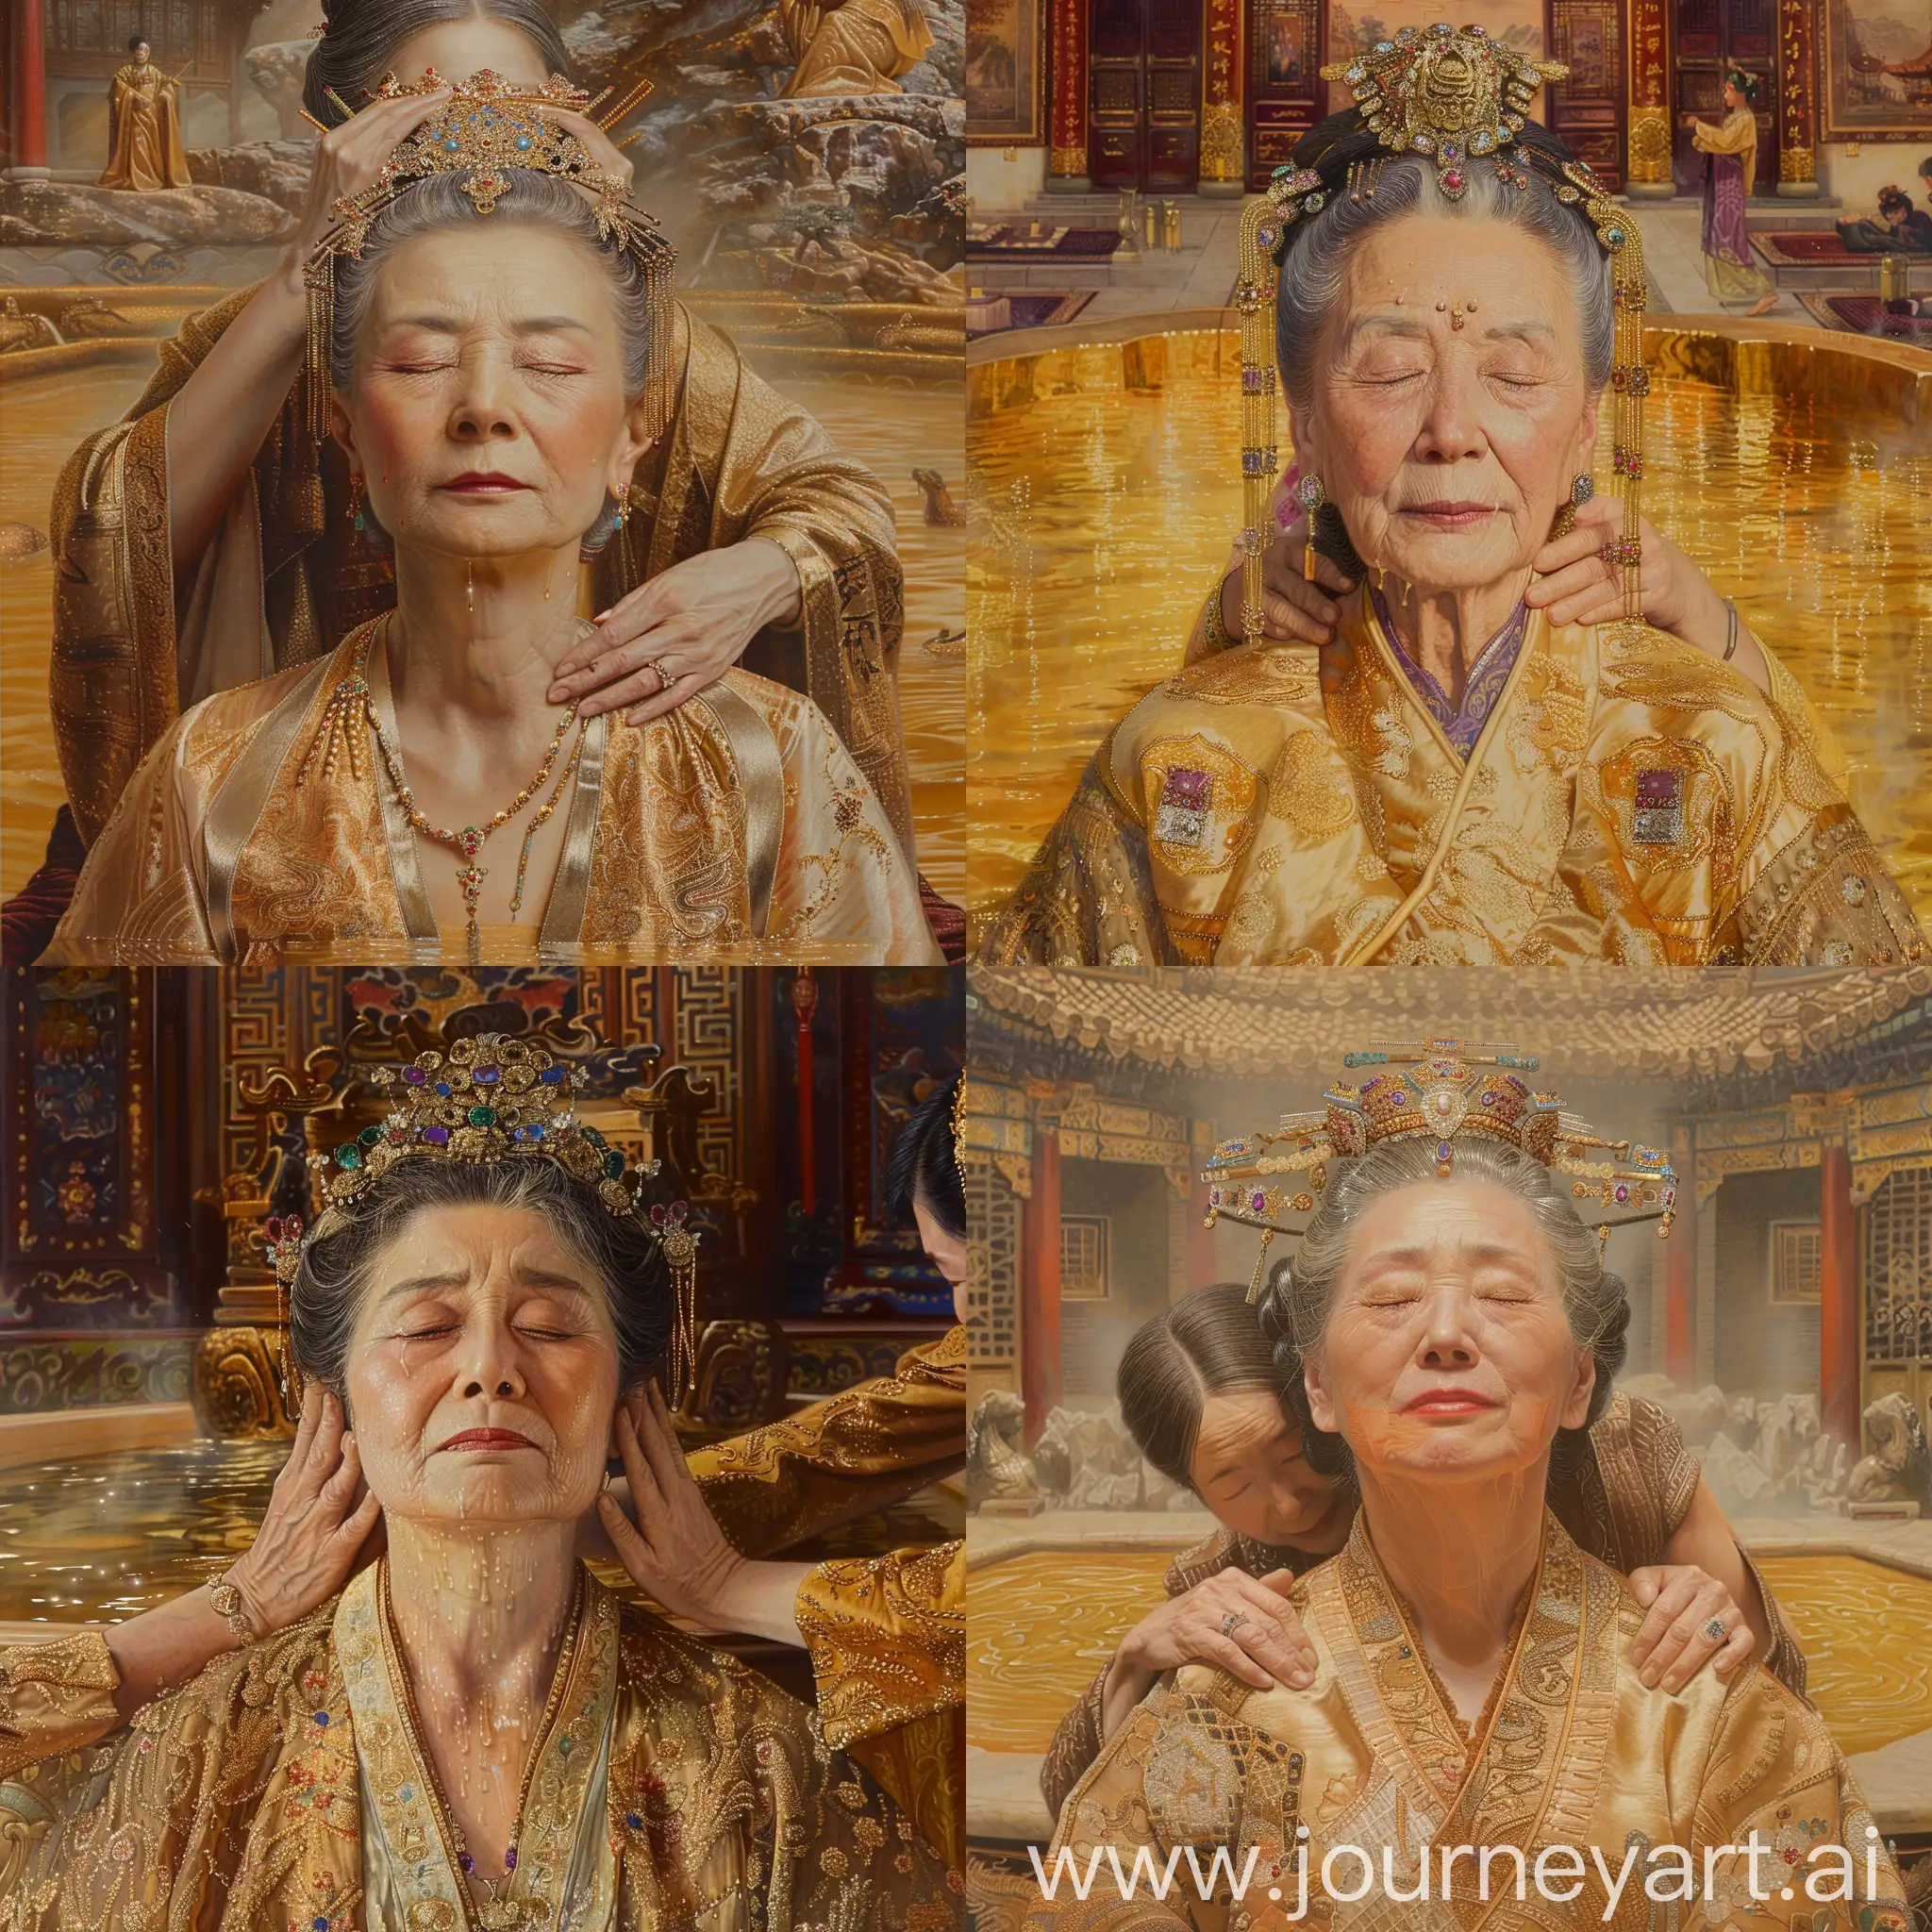 Luxurious-Scene-Chinese-Empress-Relaxing-in-Golden-Hot-Spring-with-Maid-Massage